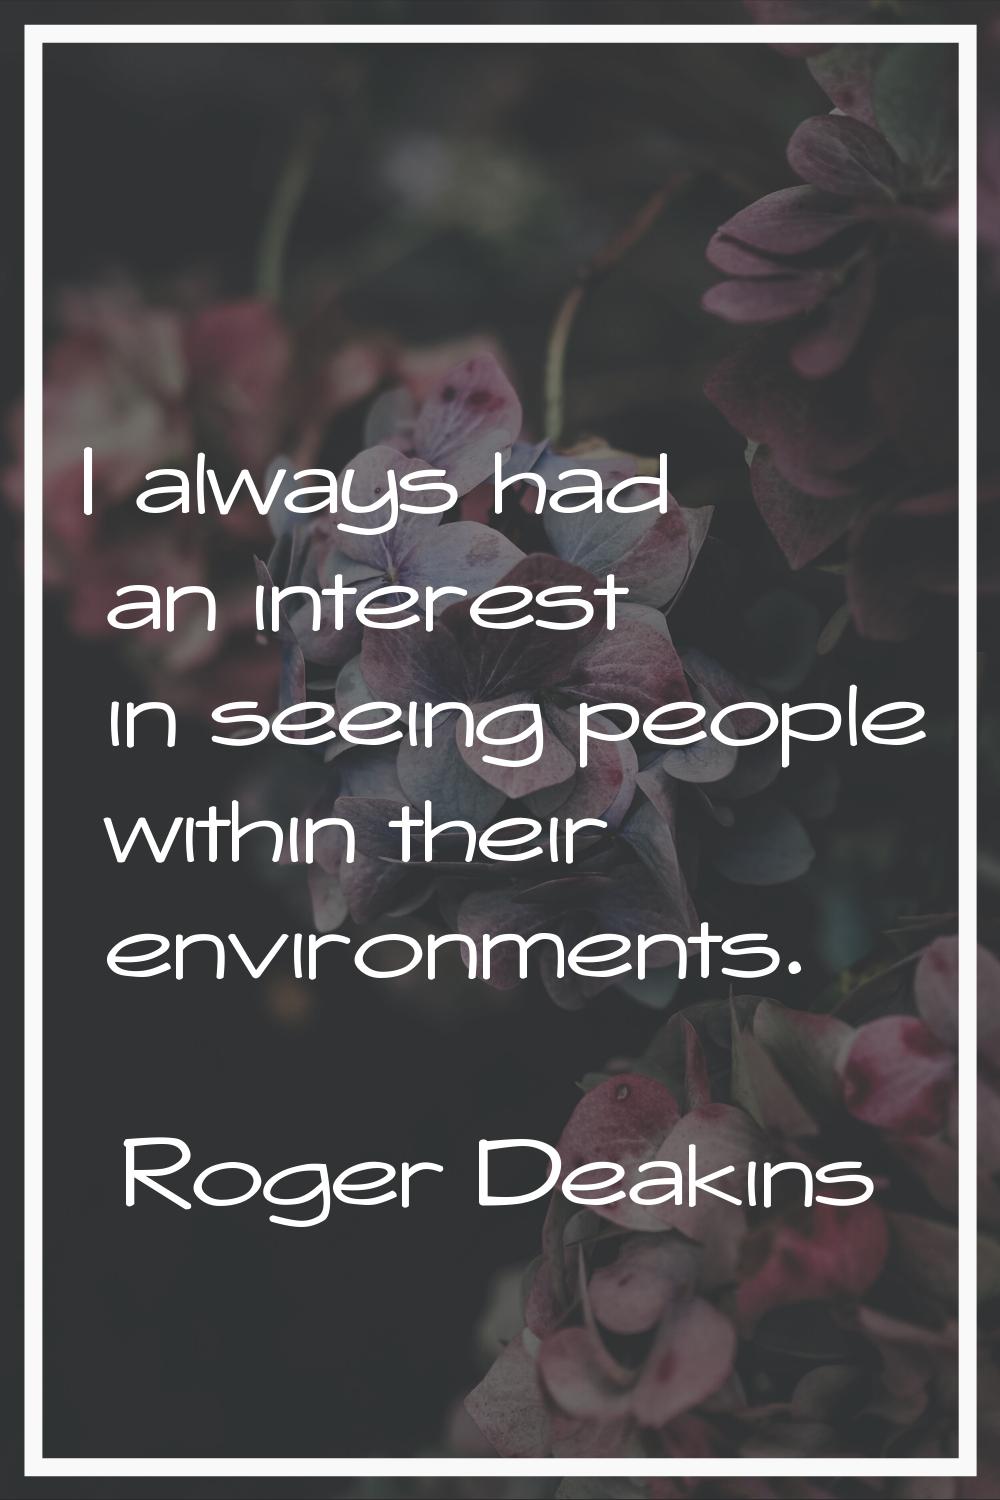 I always had an interest in seeing people within their environments.